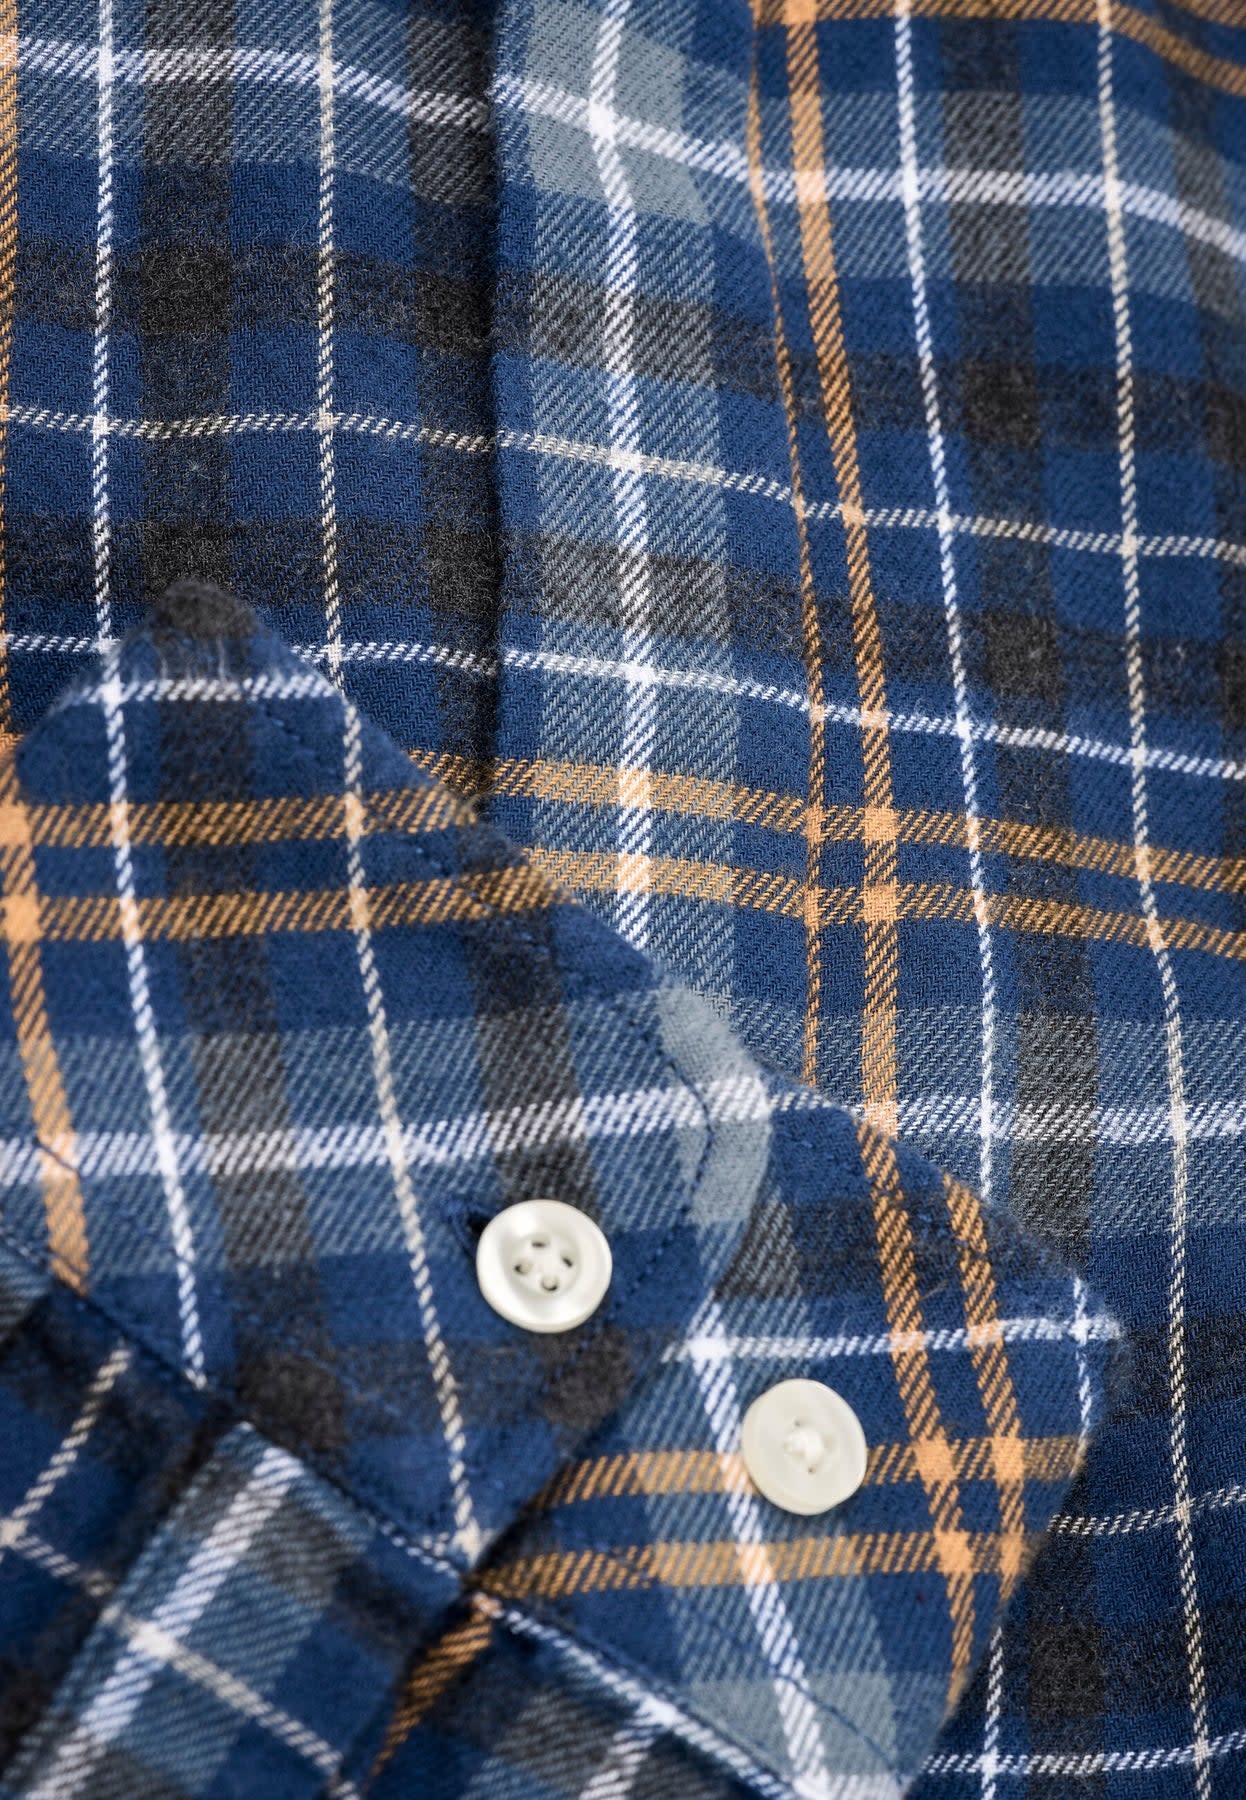 KnowledgeCotton Apparel KnowledgeCotton, Big checked flannel relaxed fit shirt, estate blue, S